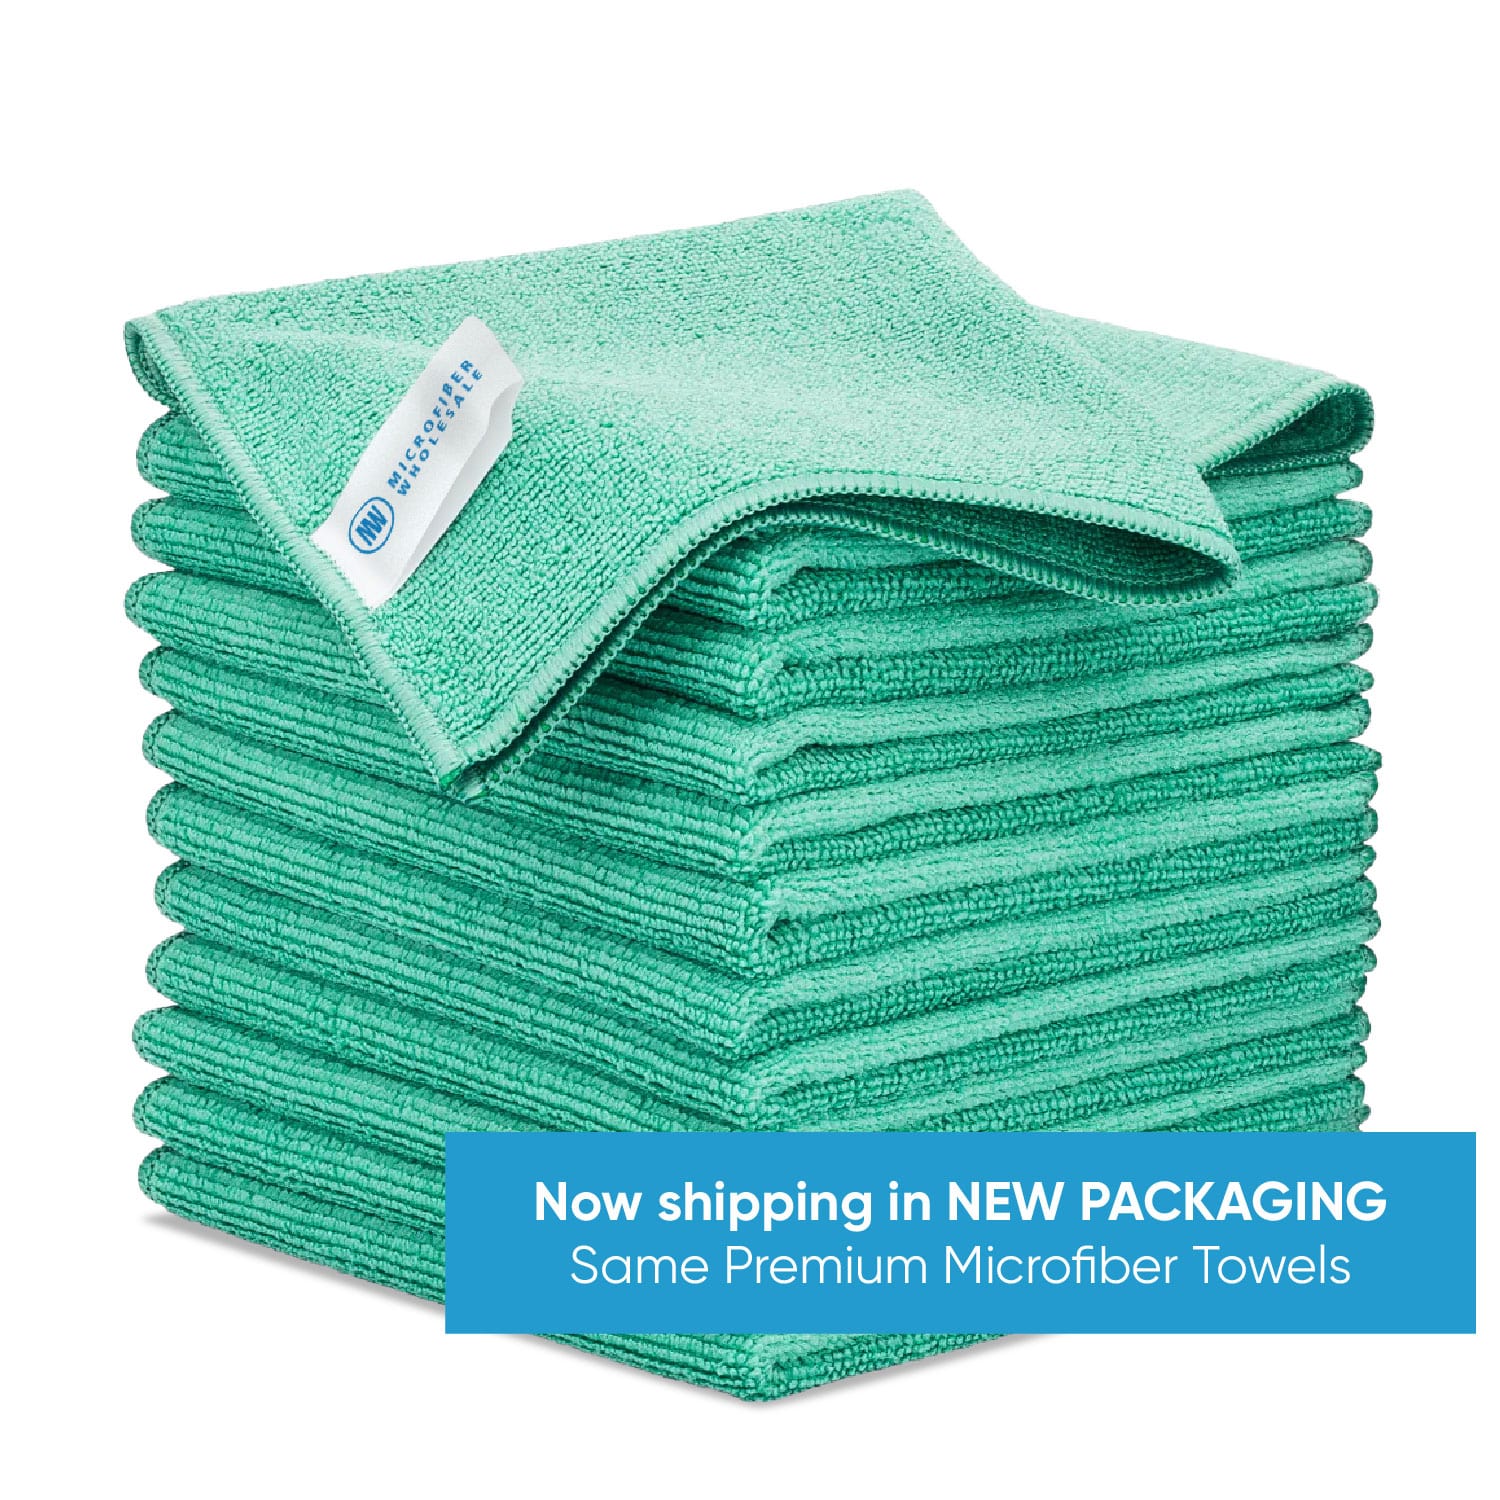 Bulk Microfiber Cleaning Towels - Red 12x12 (90pk), Size: One Size